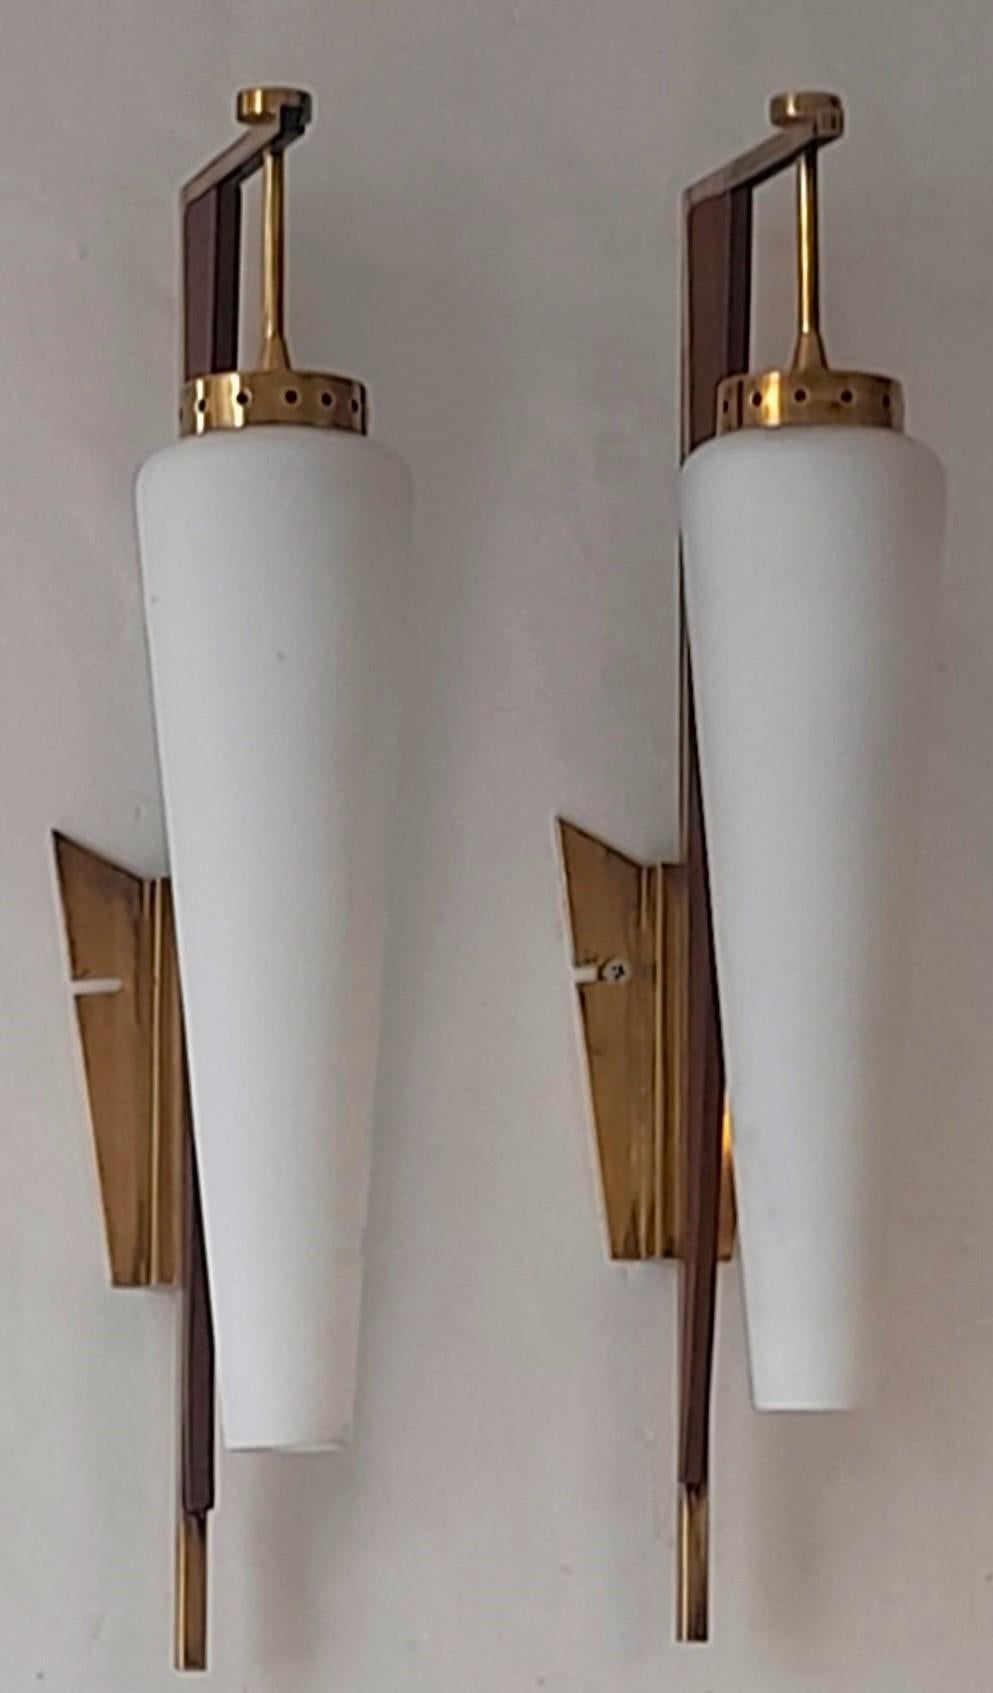 Three Stilnovo Sconces Wall Lights Brass Satin Glass Wood Accents, Italy, 1950s In Good Condition For Sale In Frankfurt am Main, DE